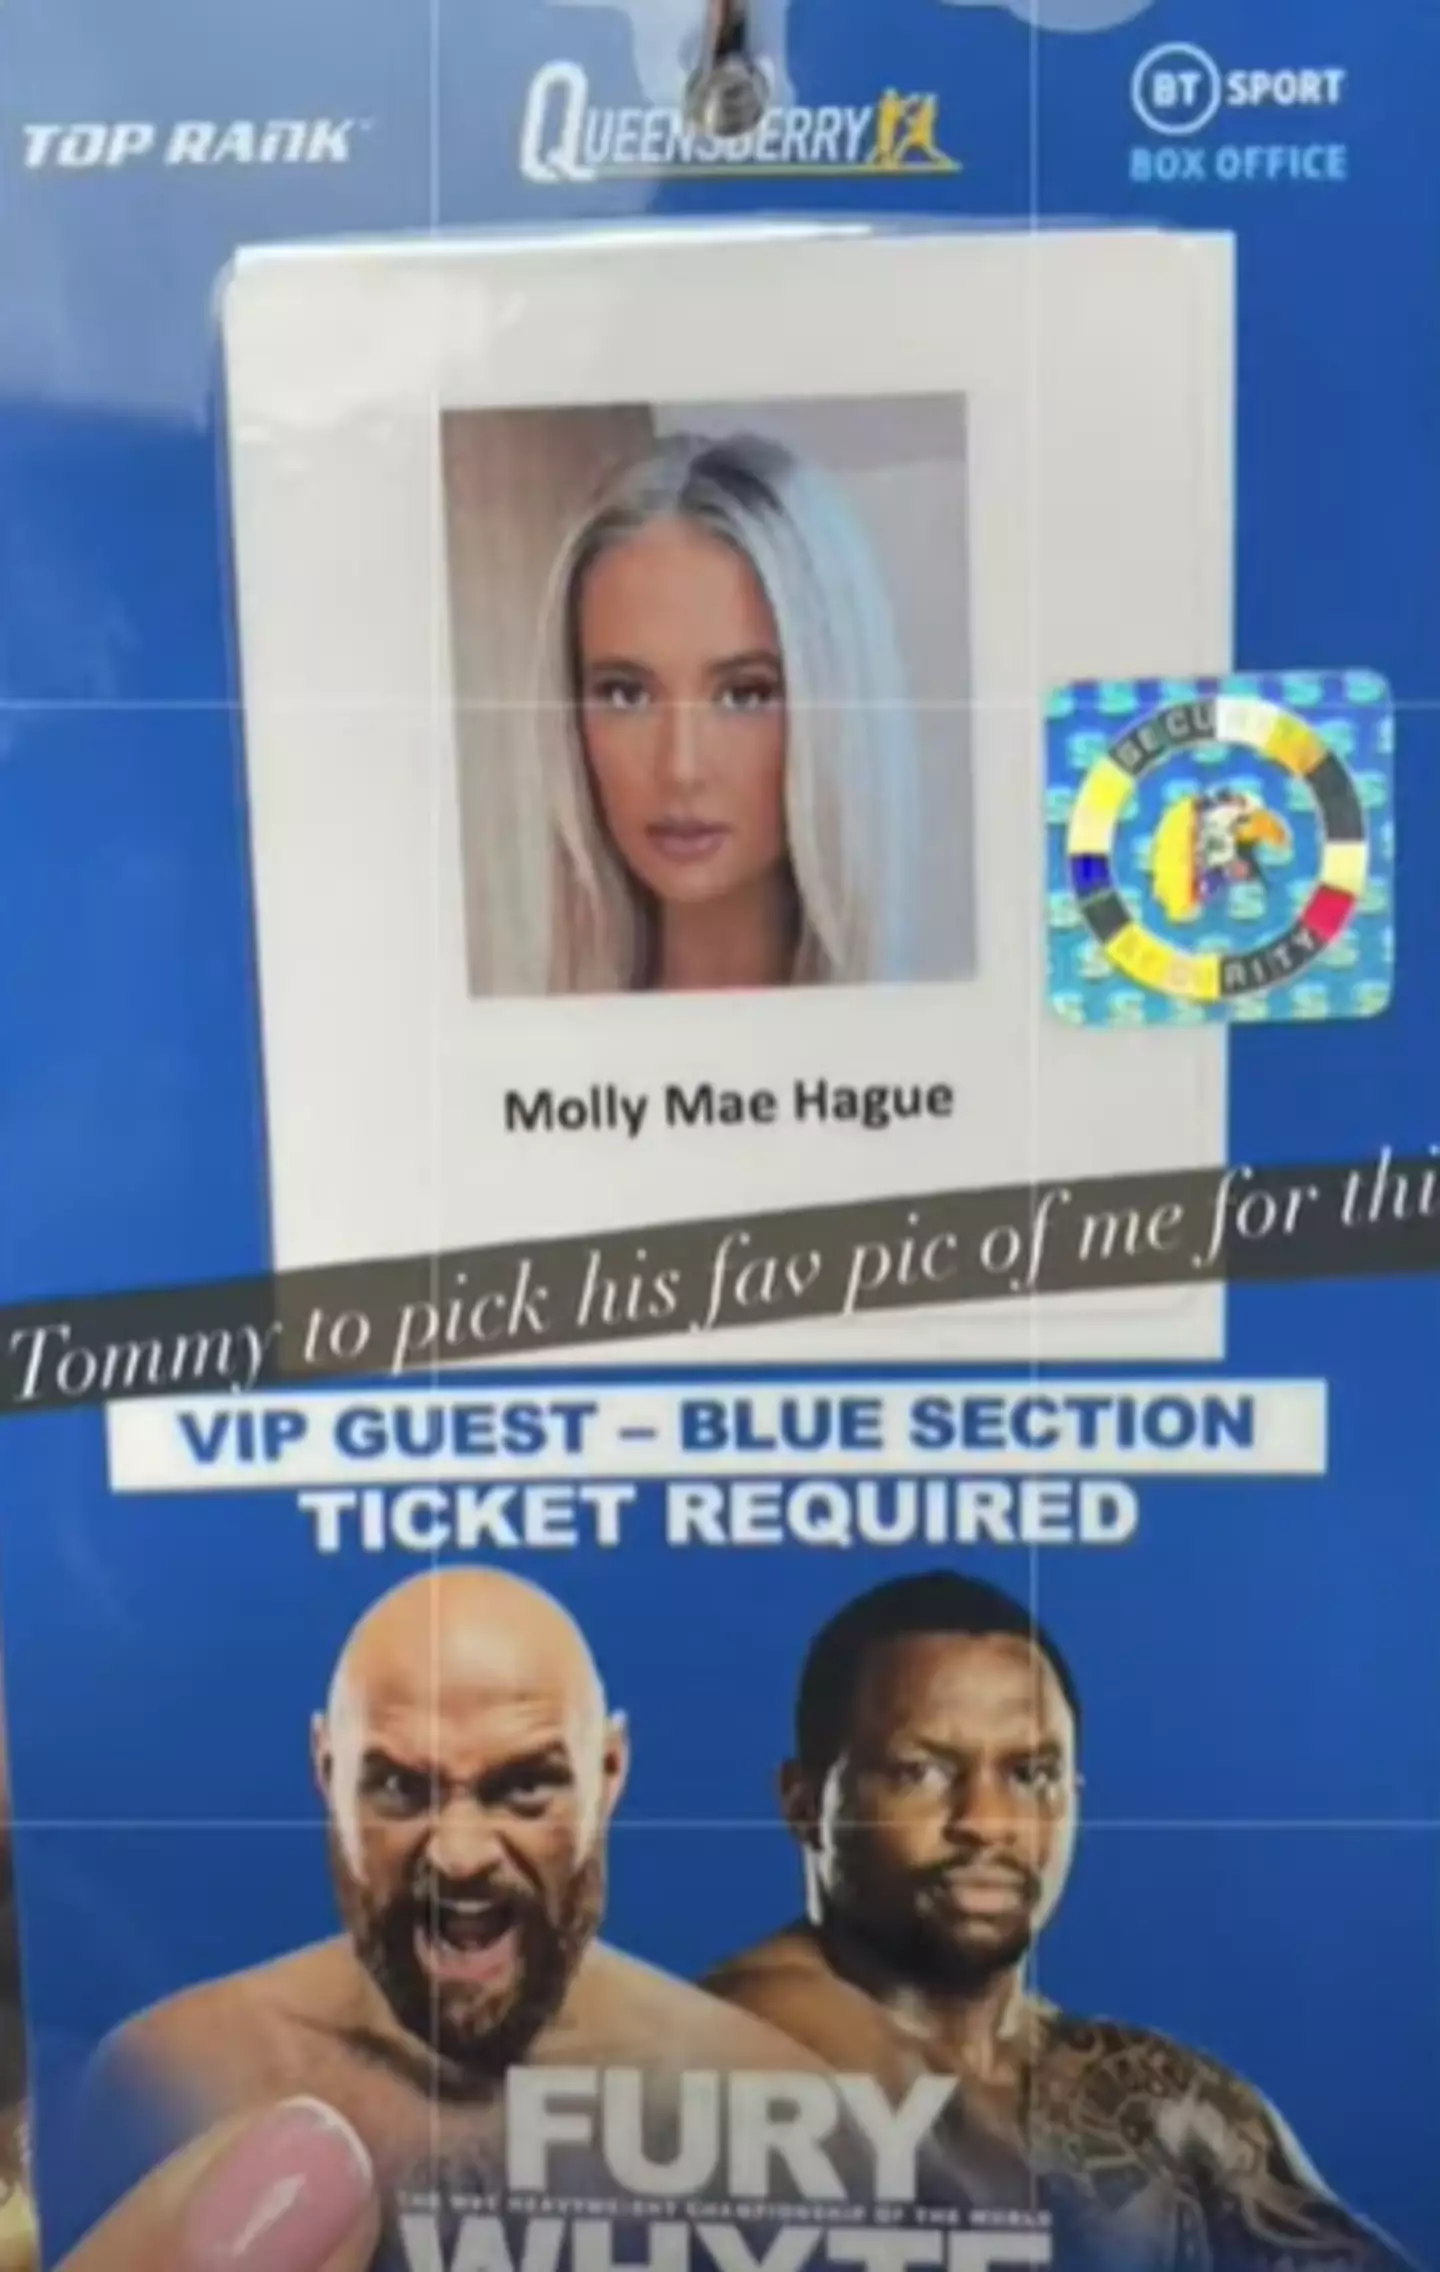 Molly-Mae Hague posting her VIP pass gave Jack an idea.